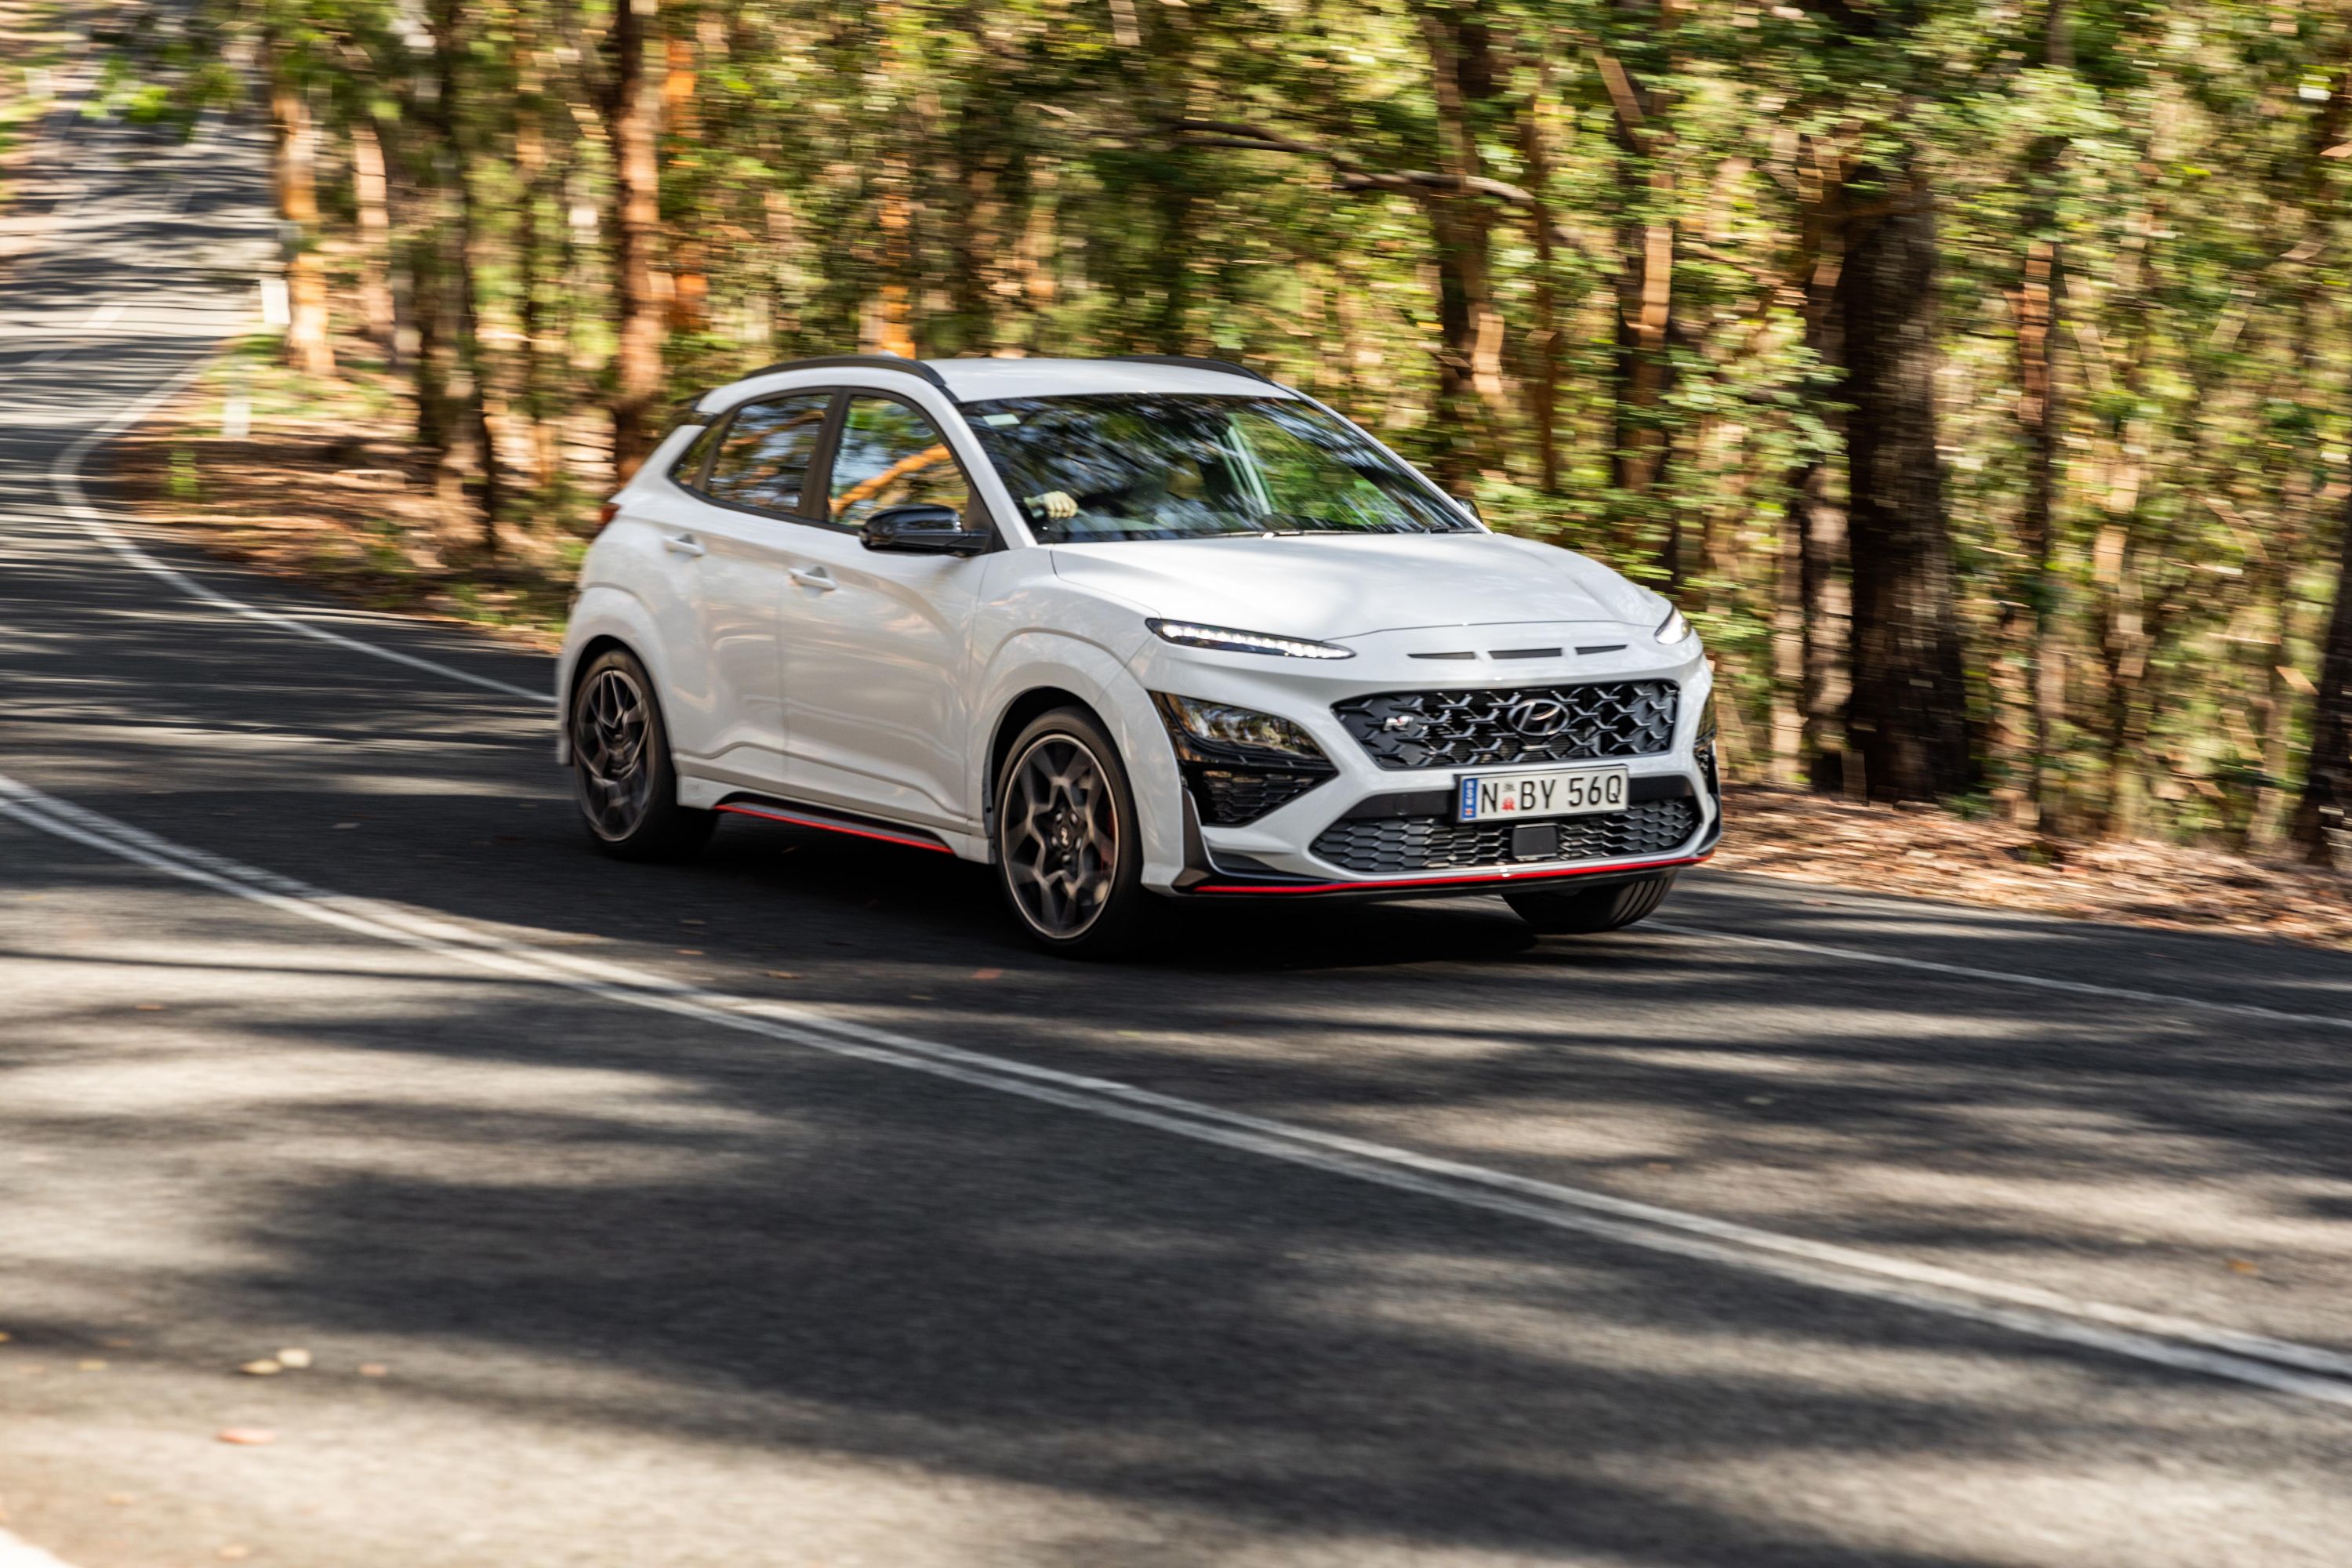 2022 Cupra Formentor review: Fast small SUV to tackle Kona N, T-Roc R -  launching new brand